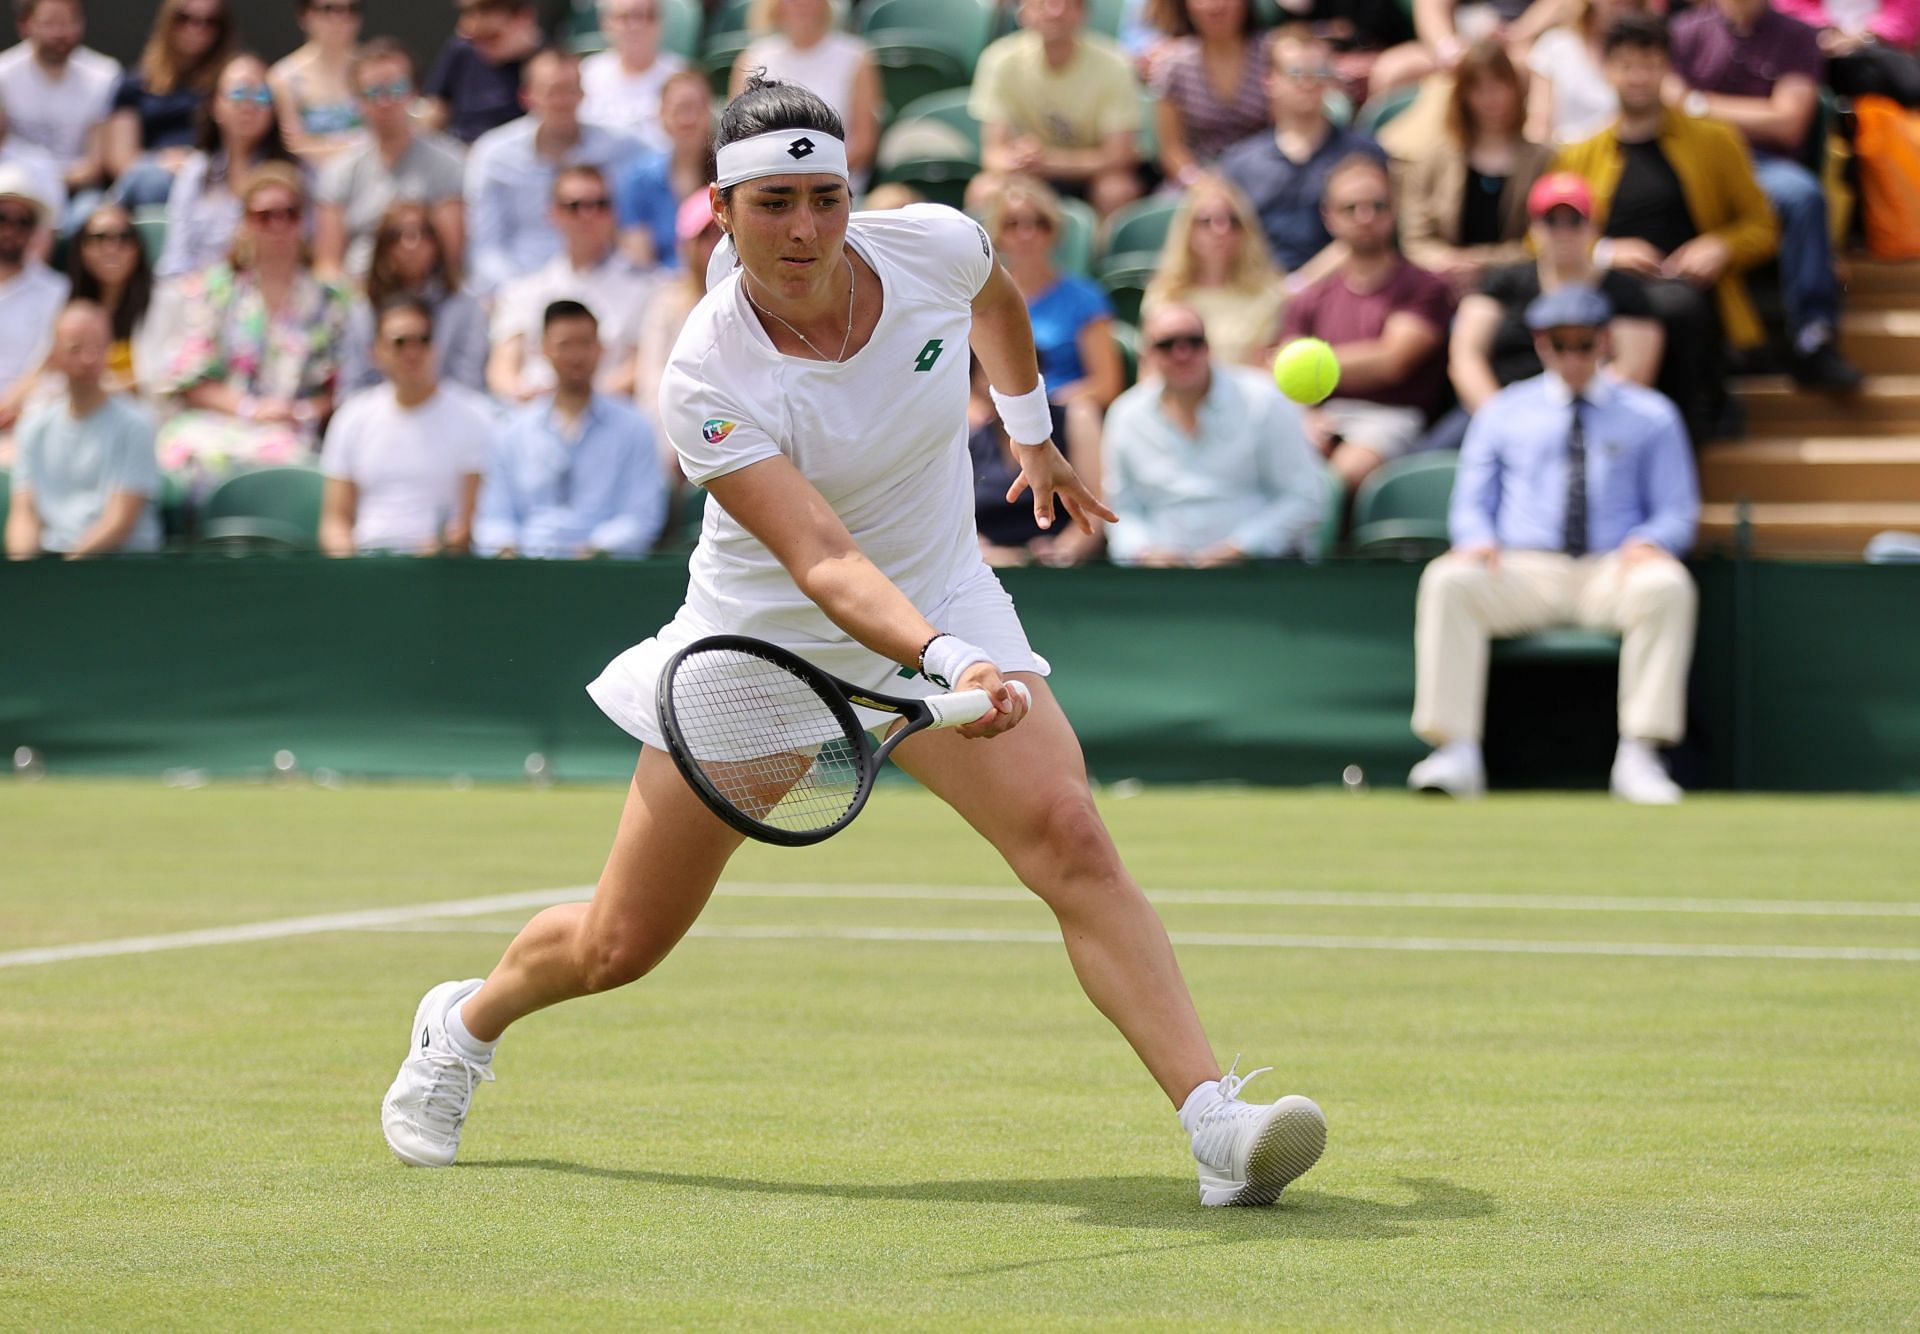 Ons Jabeur will be eyeing Grand Slam success as one of highest seeds at Wimbledon.